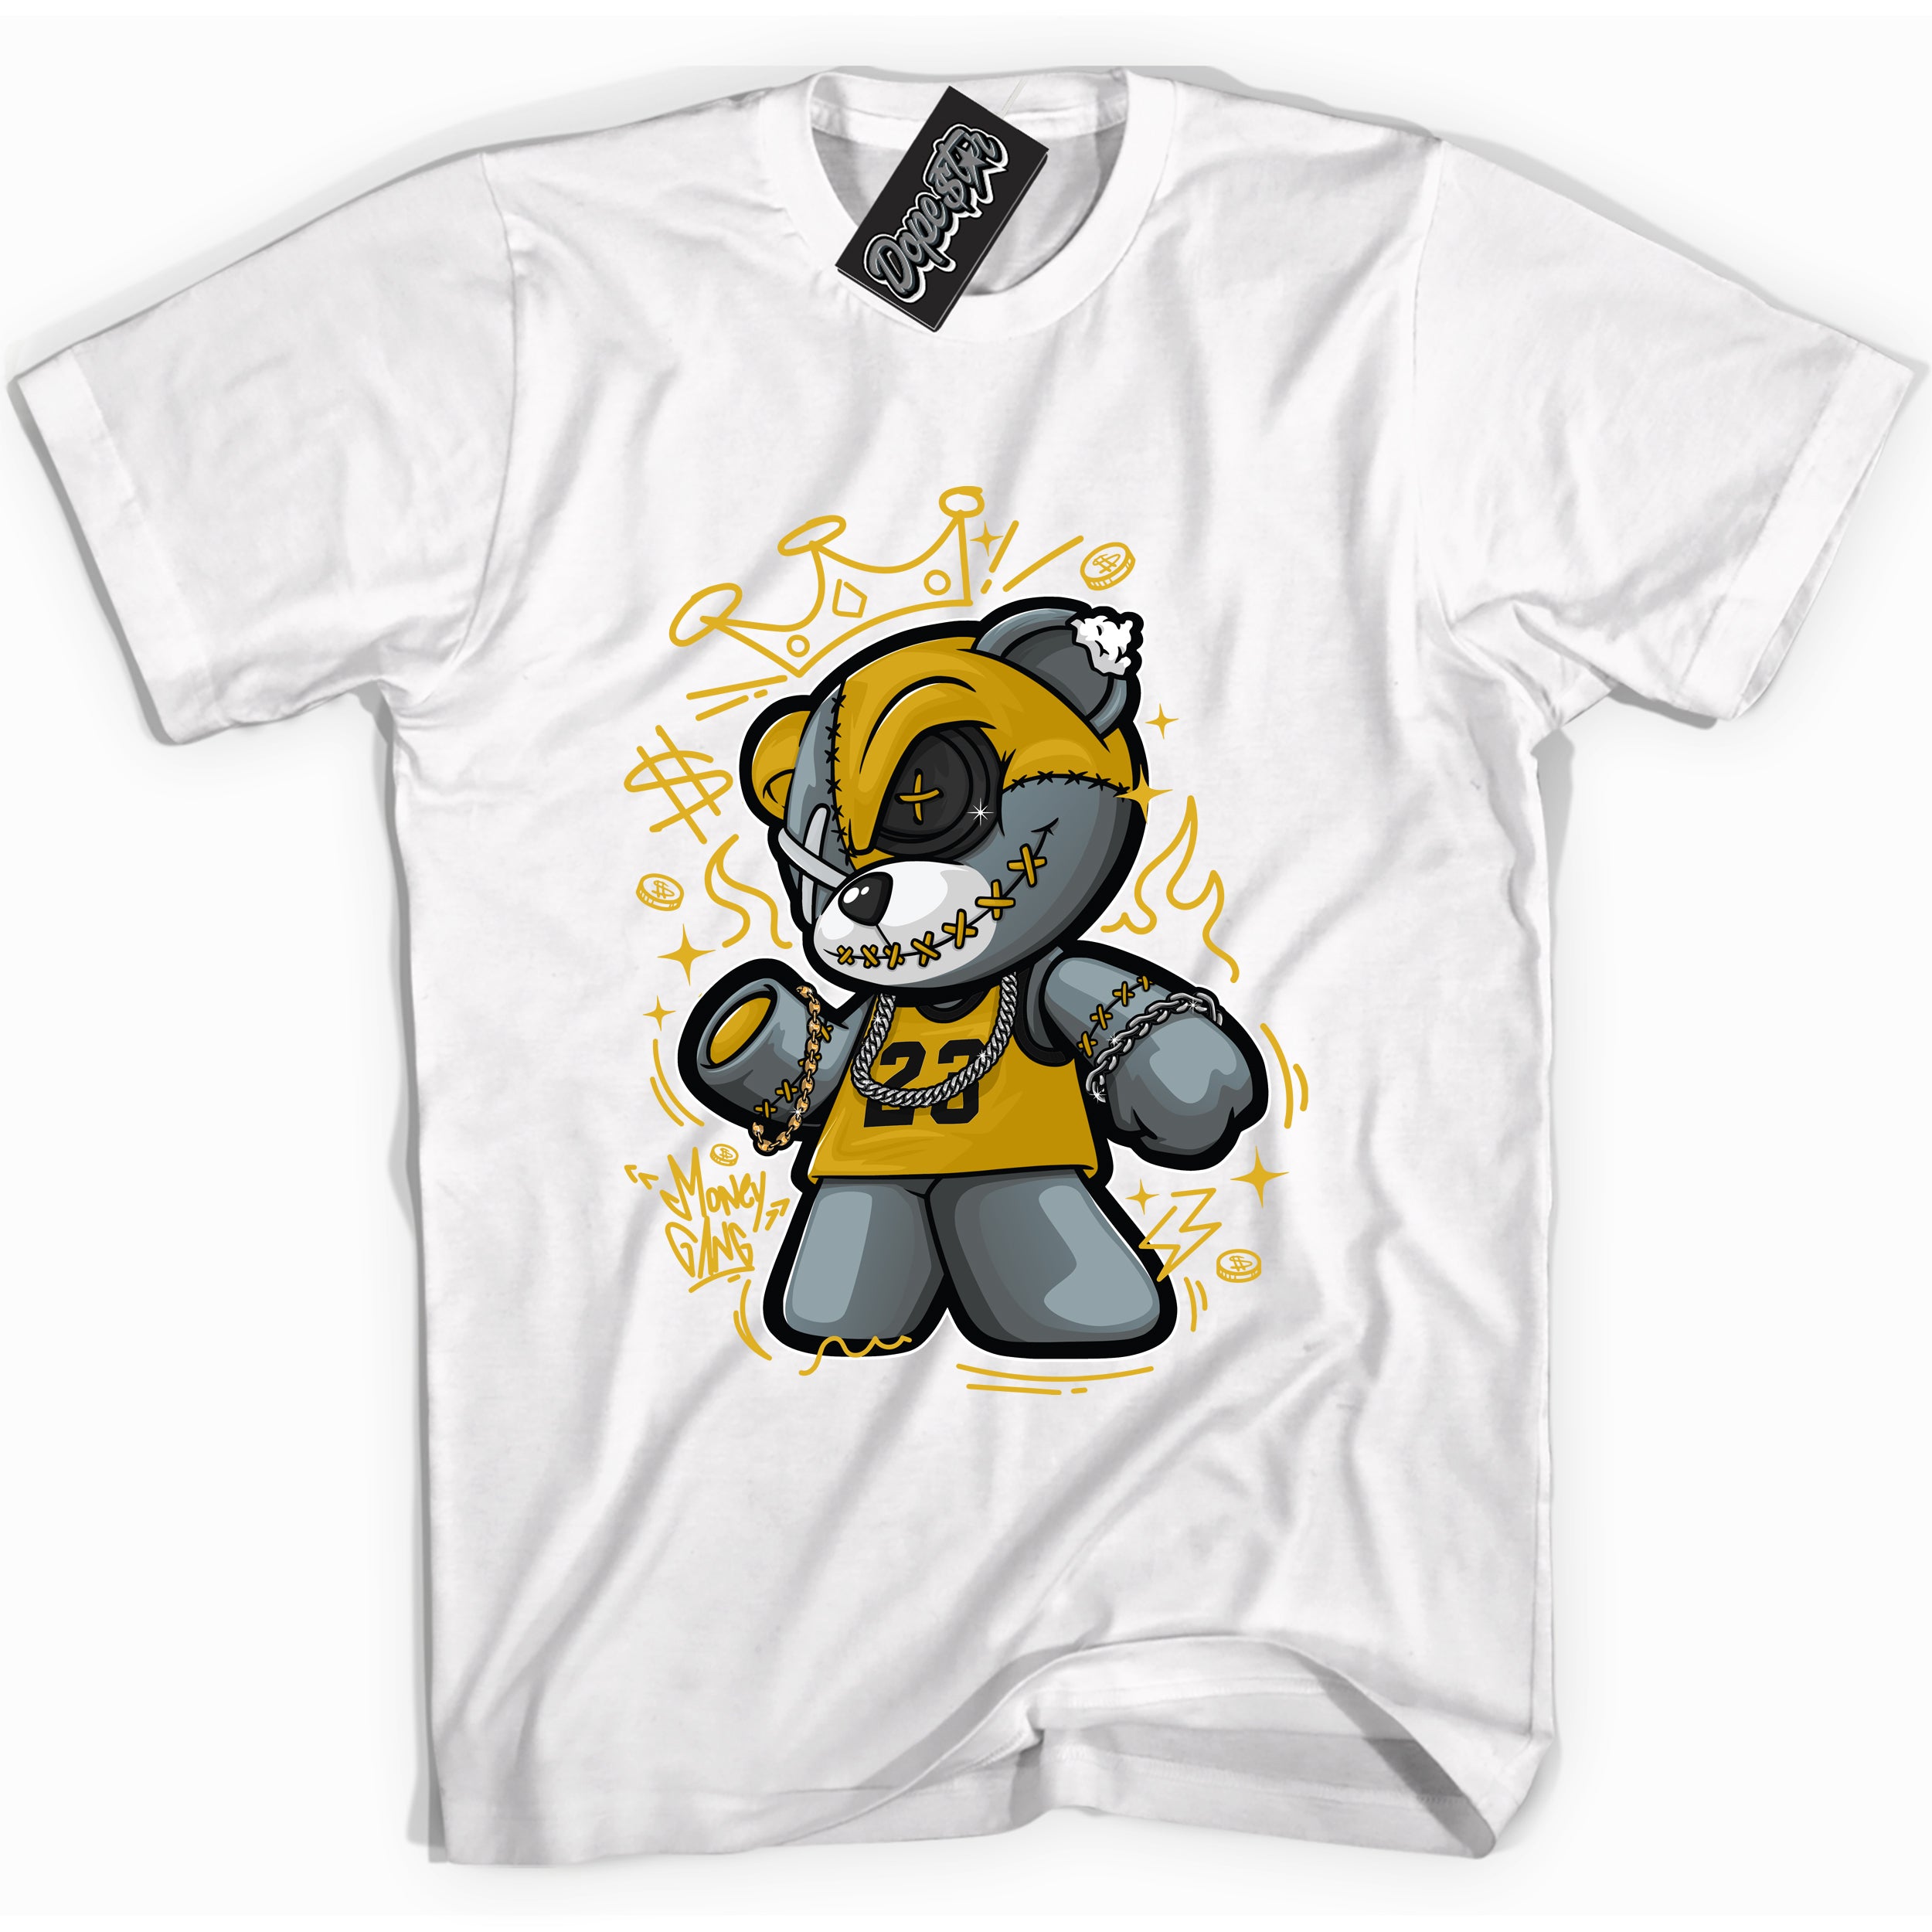 Cool White Shirt with “ Money Gang Bear” design that perfectly matches Yellow Ochre 6s Sneakers.